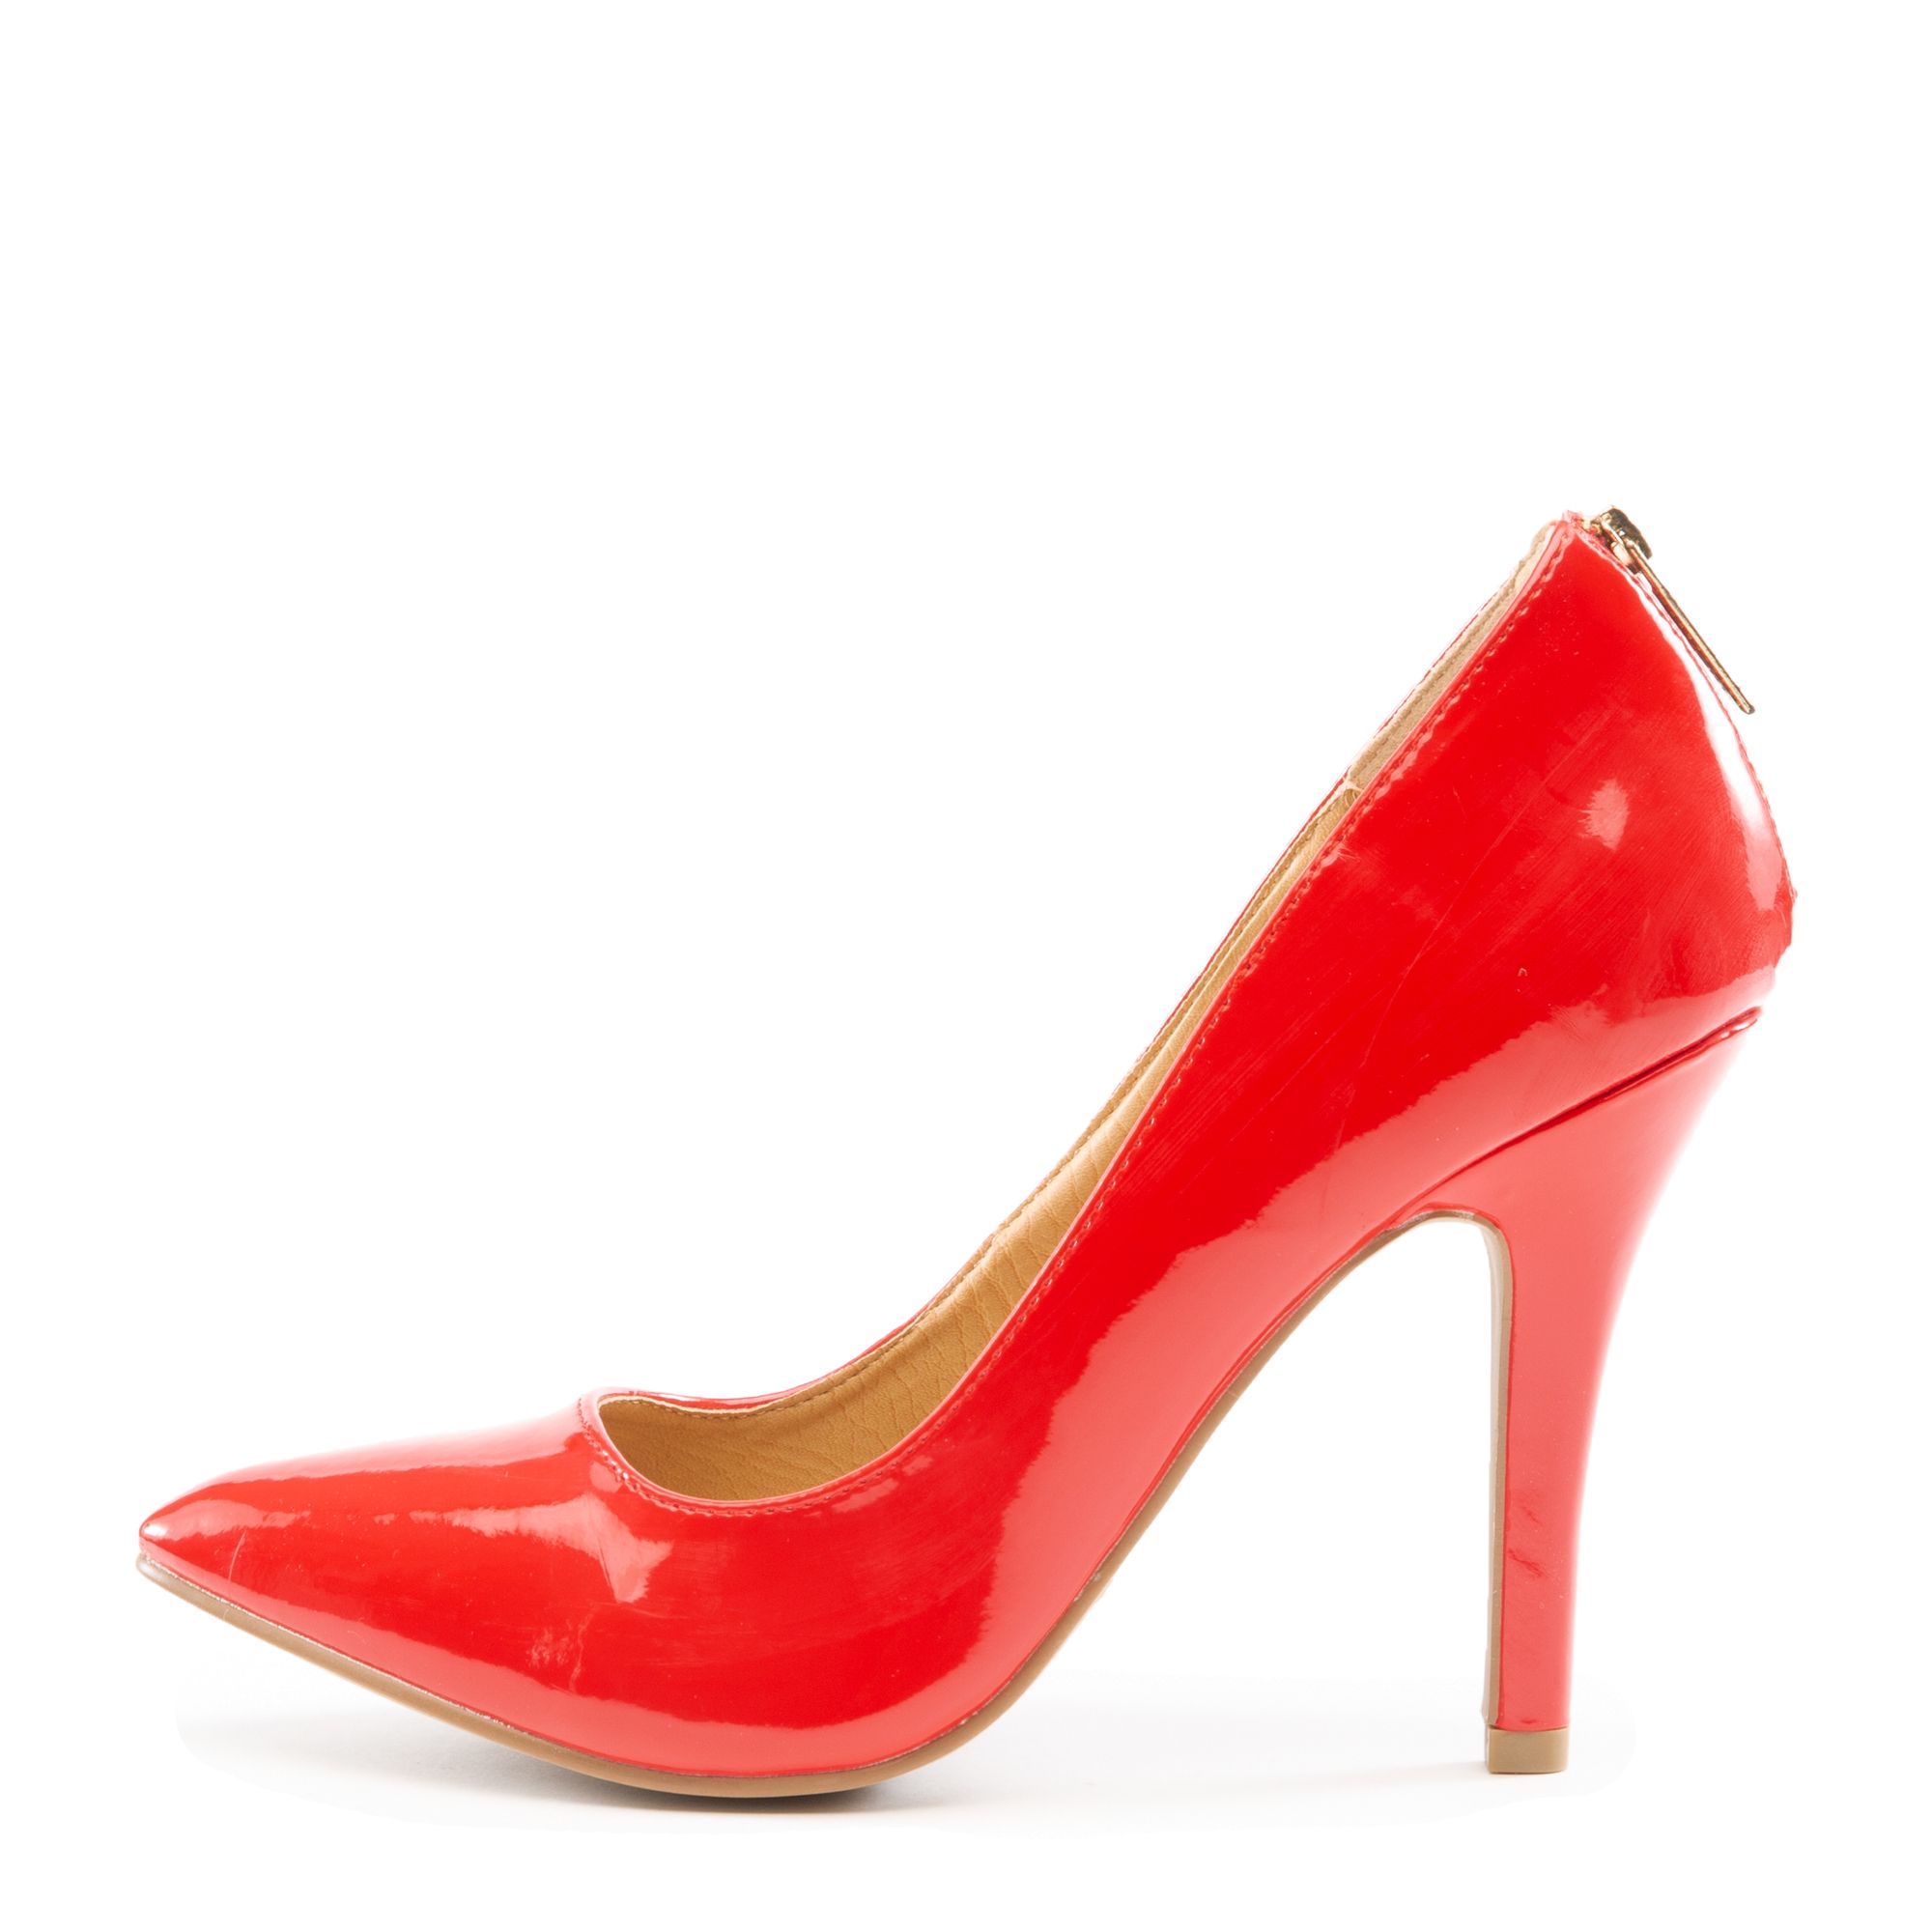 FORTUNE DYNAMICS Mellina Patent High Heels MELLINA/RED - Shiekh